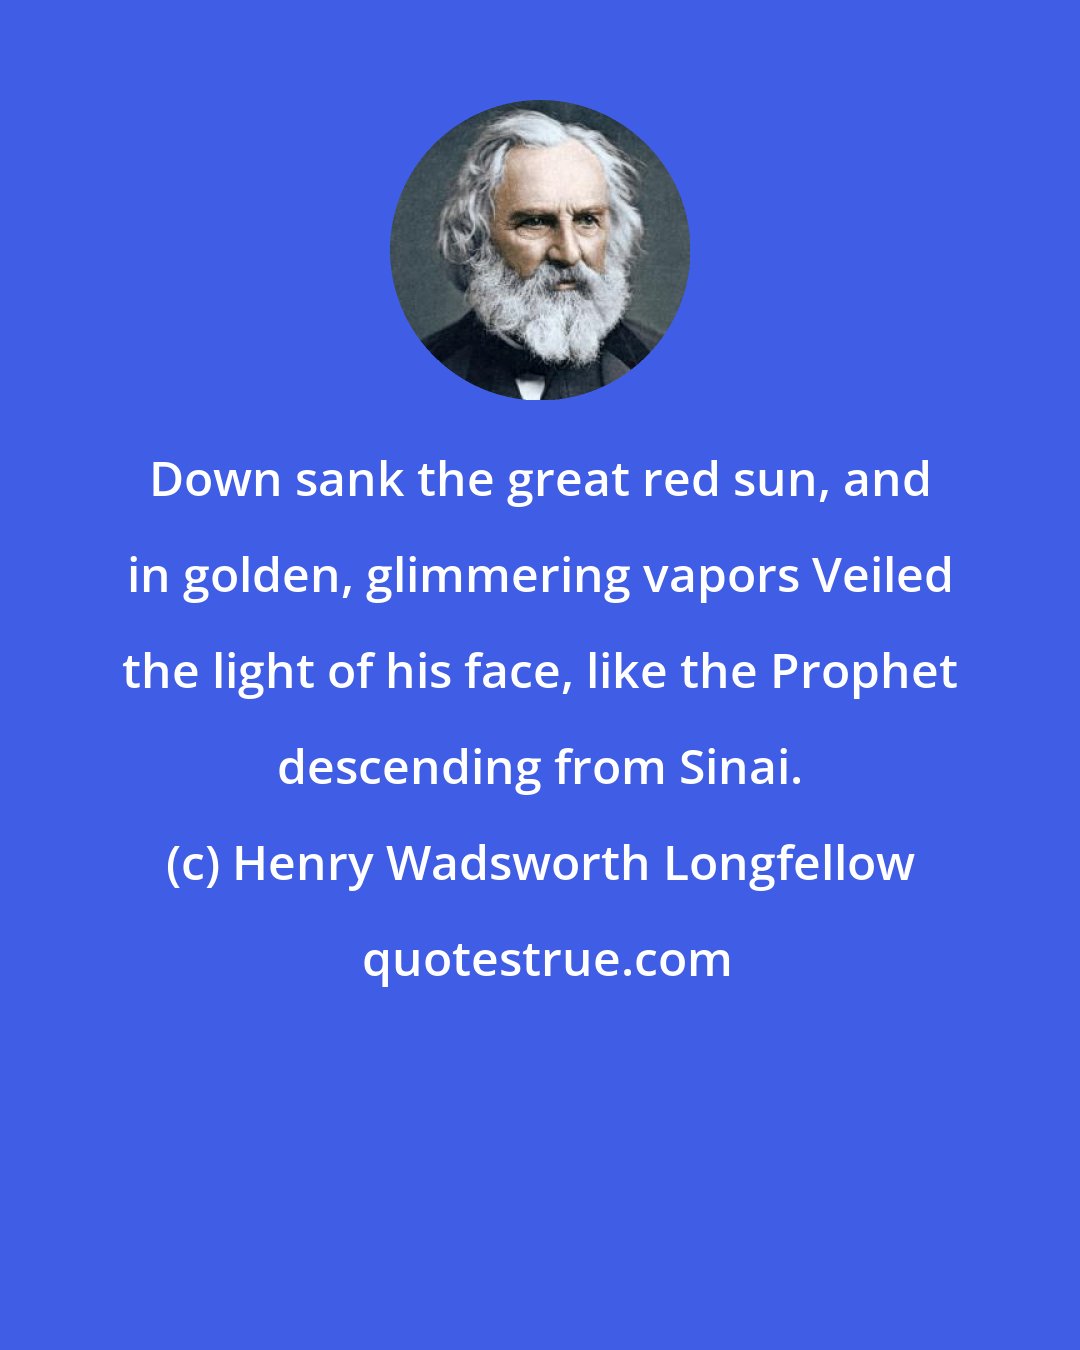 Henry Wadsworth Longfellow: Down sank the great red sun, and in golden, glimmering vapors Veiled the light of his face, like the Prophet descending from Sinai.